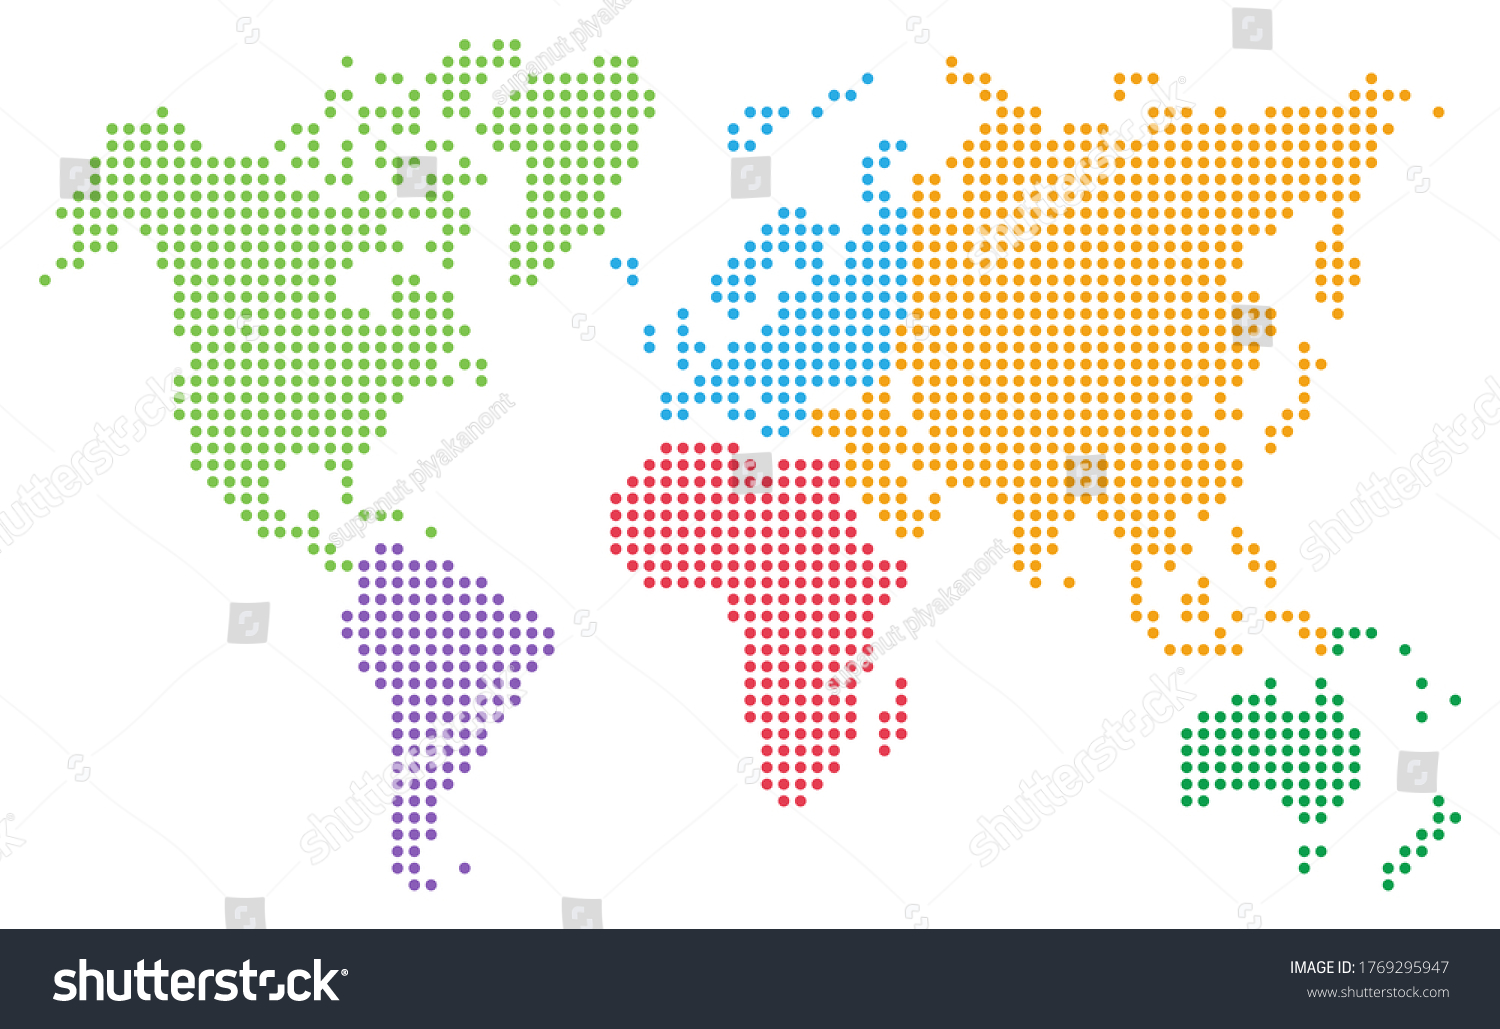 Colorful Dotted World Mapvector Illustration Stock Vector Royalty Free 1769295947 Shutterstock 